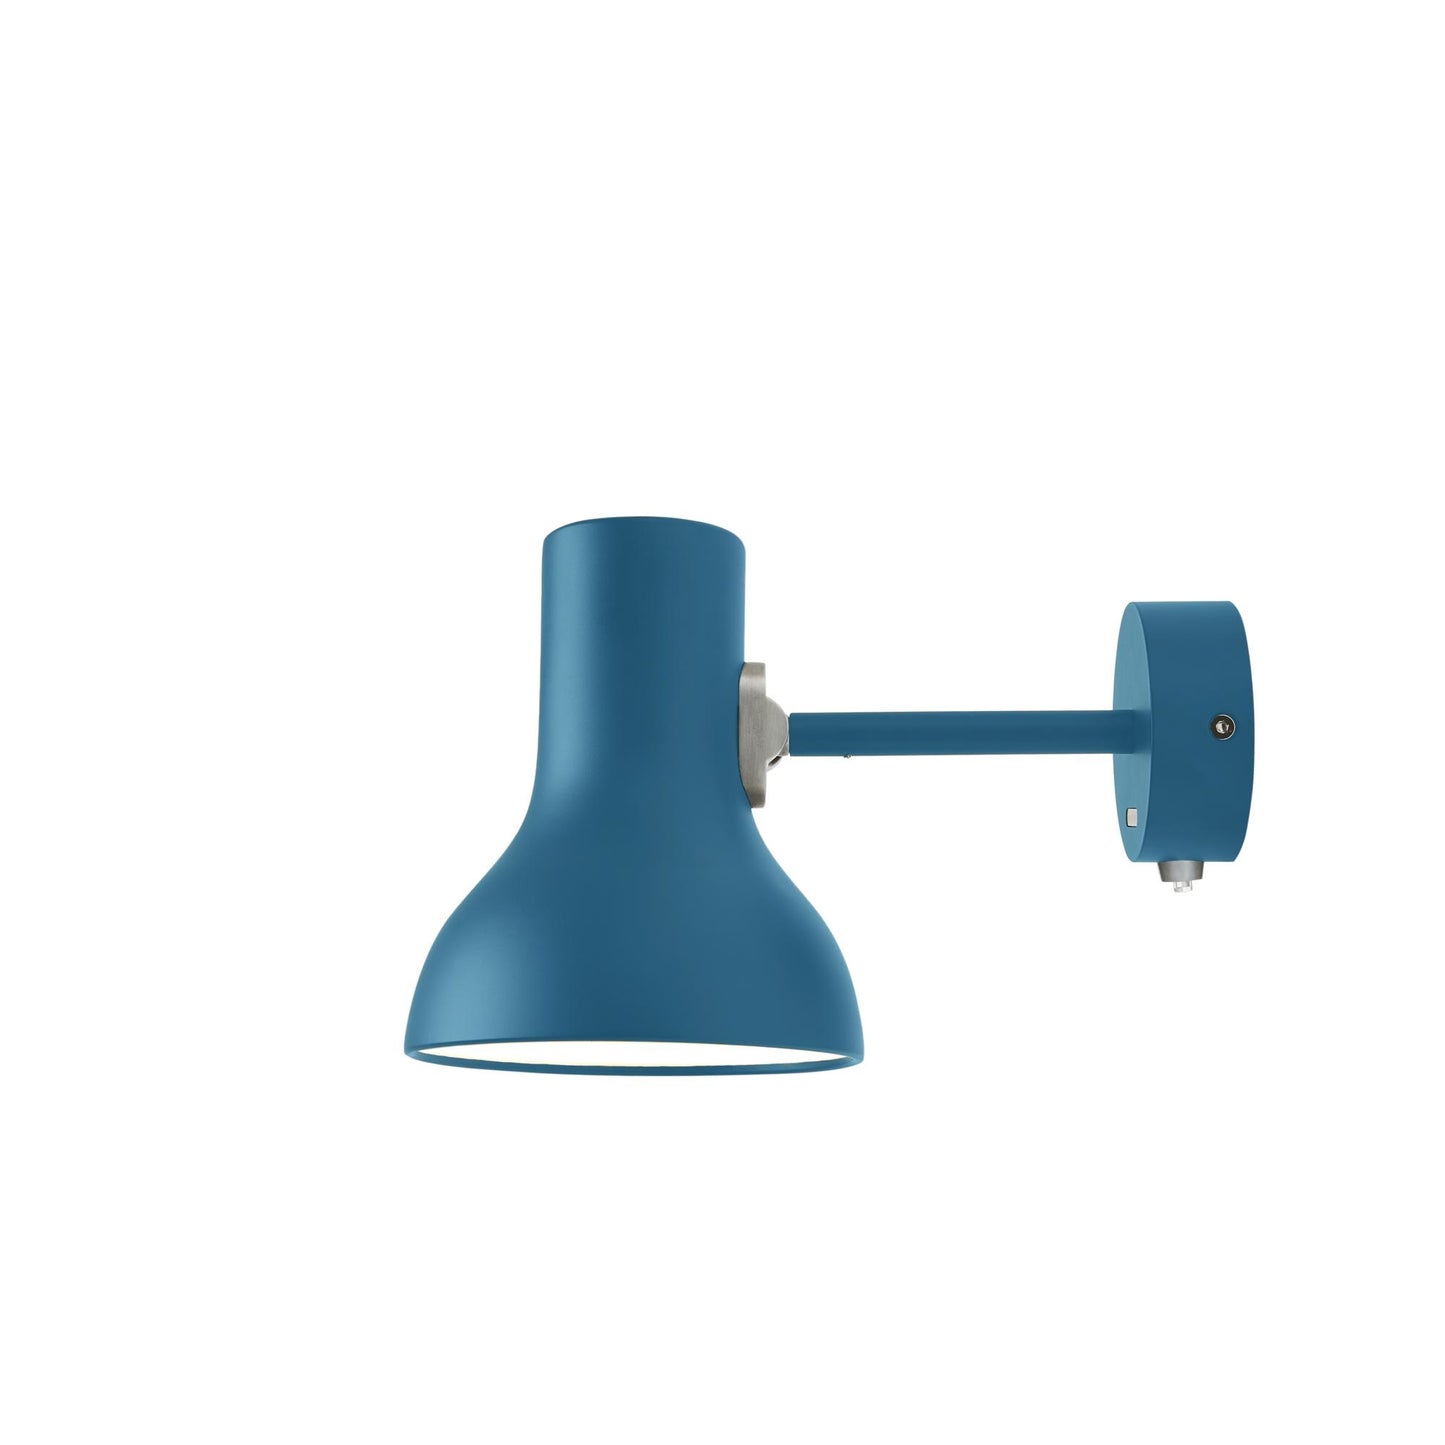 Type 75 Mini Wall Lamp (Margaret Howell Edition) by Anglepoise #Saxon Blue